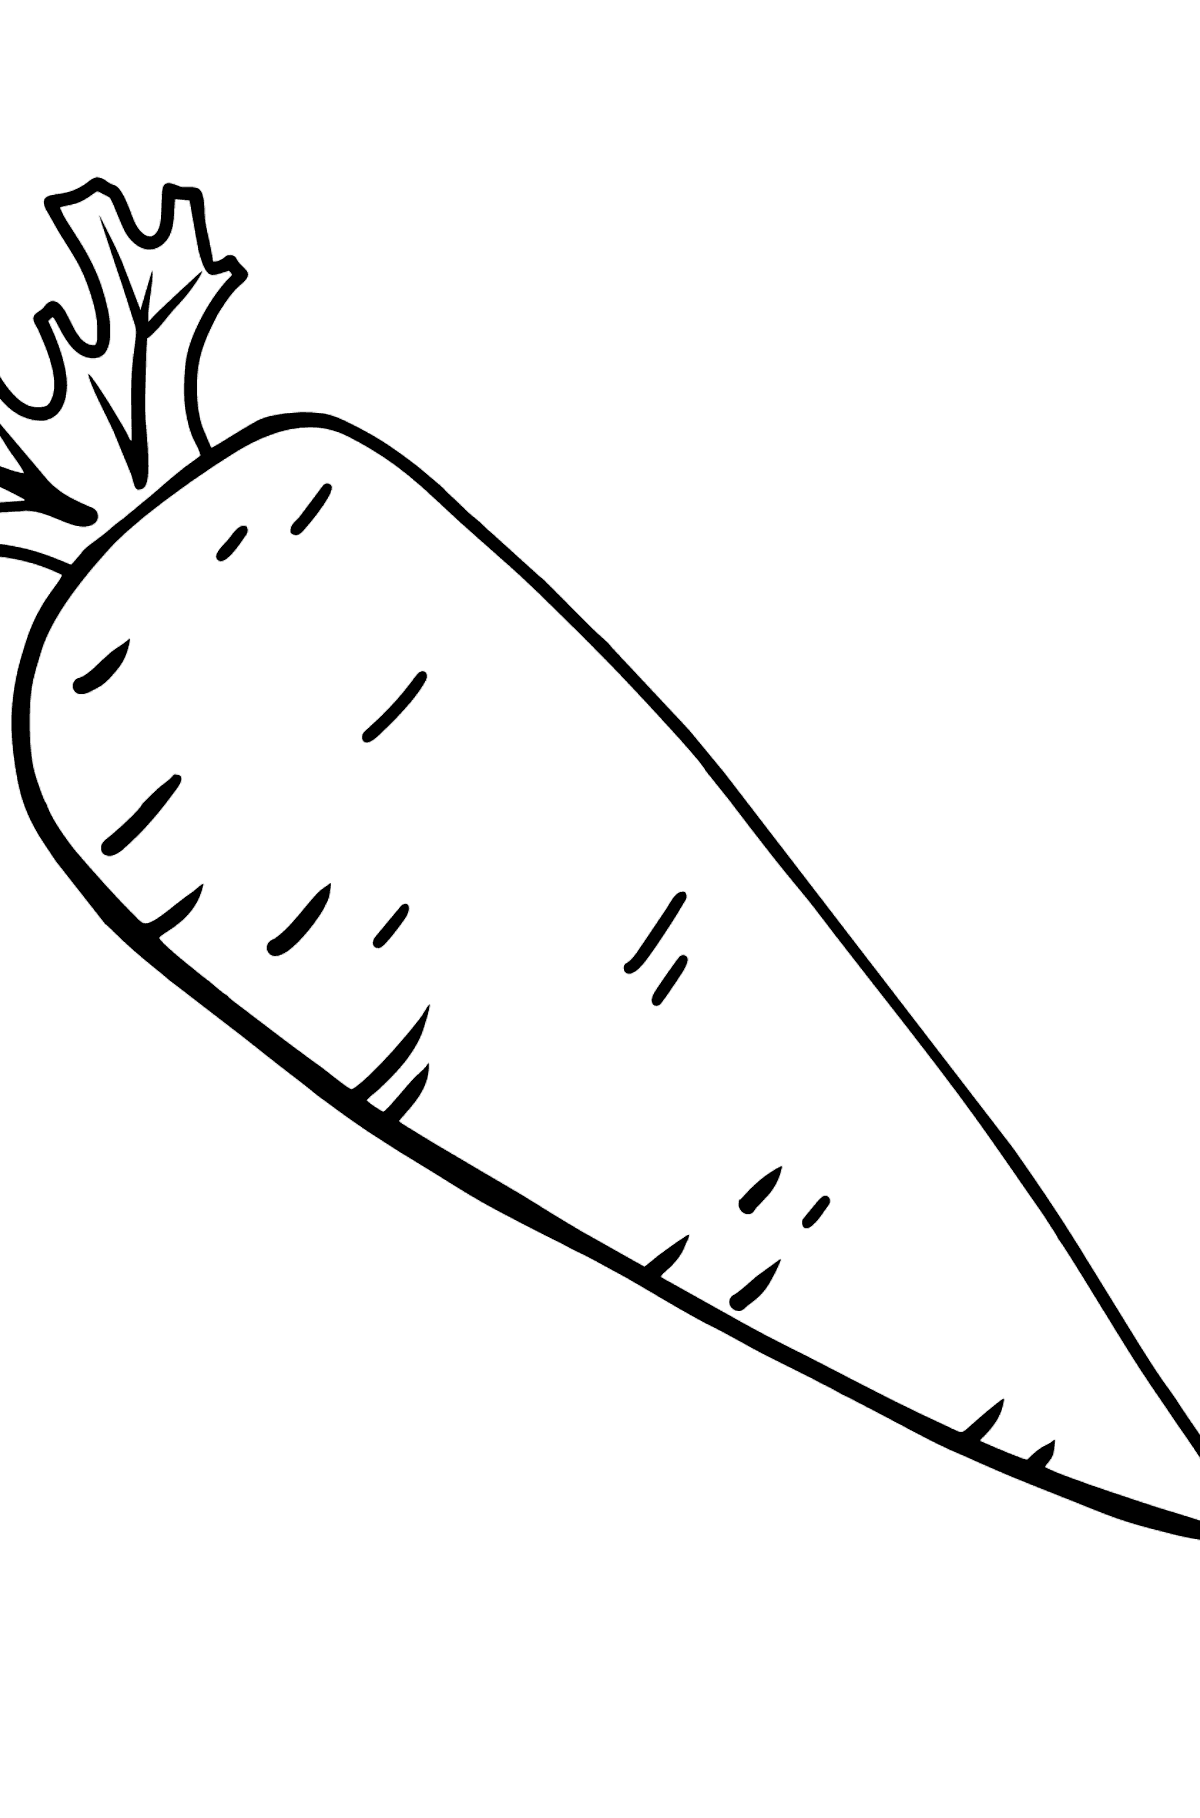 Carrot coloring page - Coloring Pages for Kids